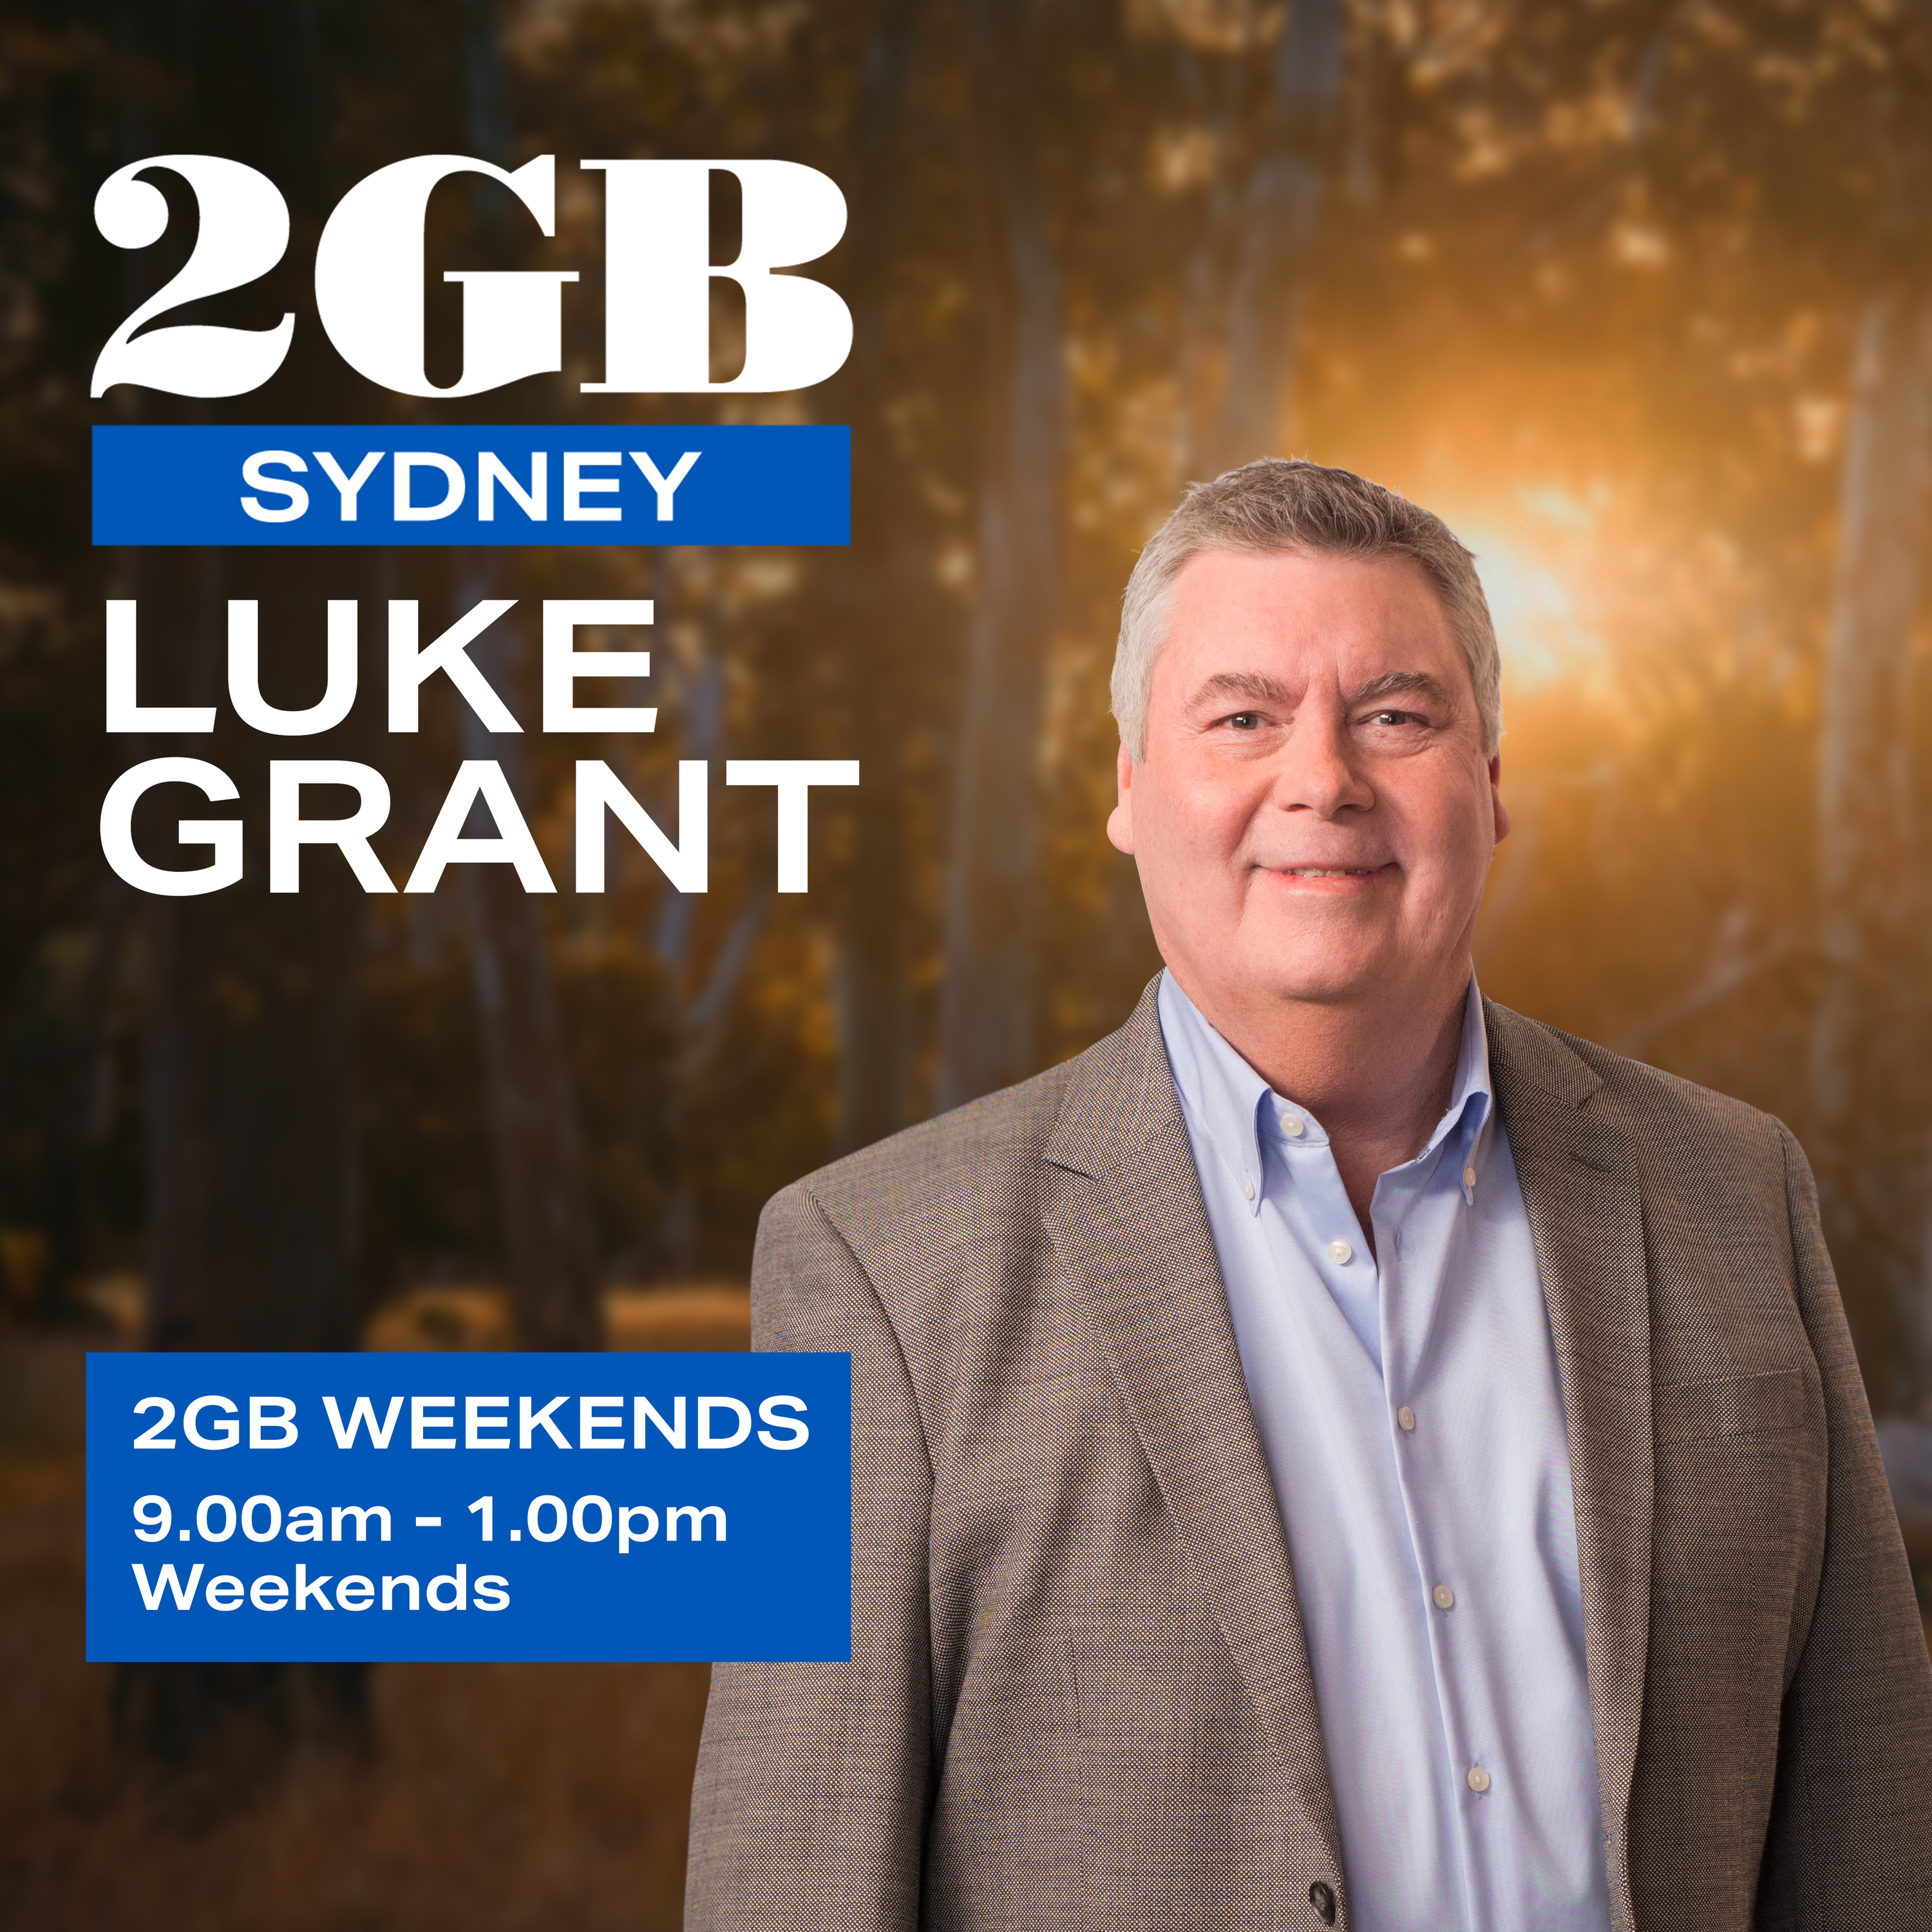 Weekends with Luke Grant - Sunday, 26th of May